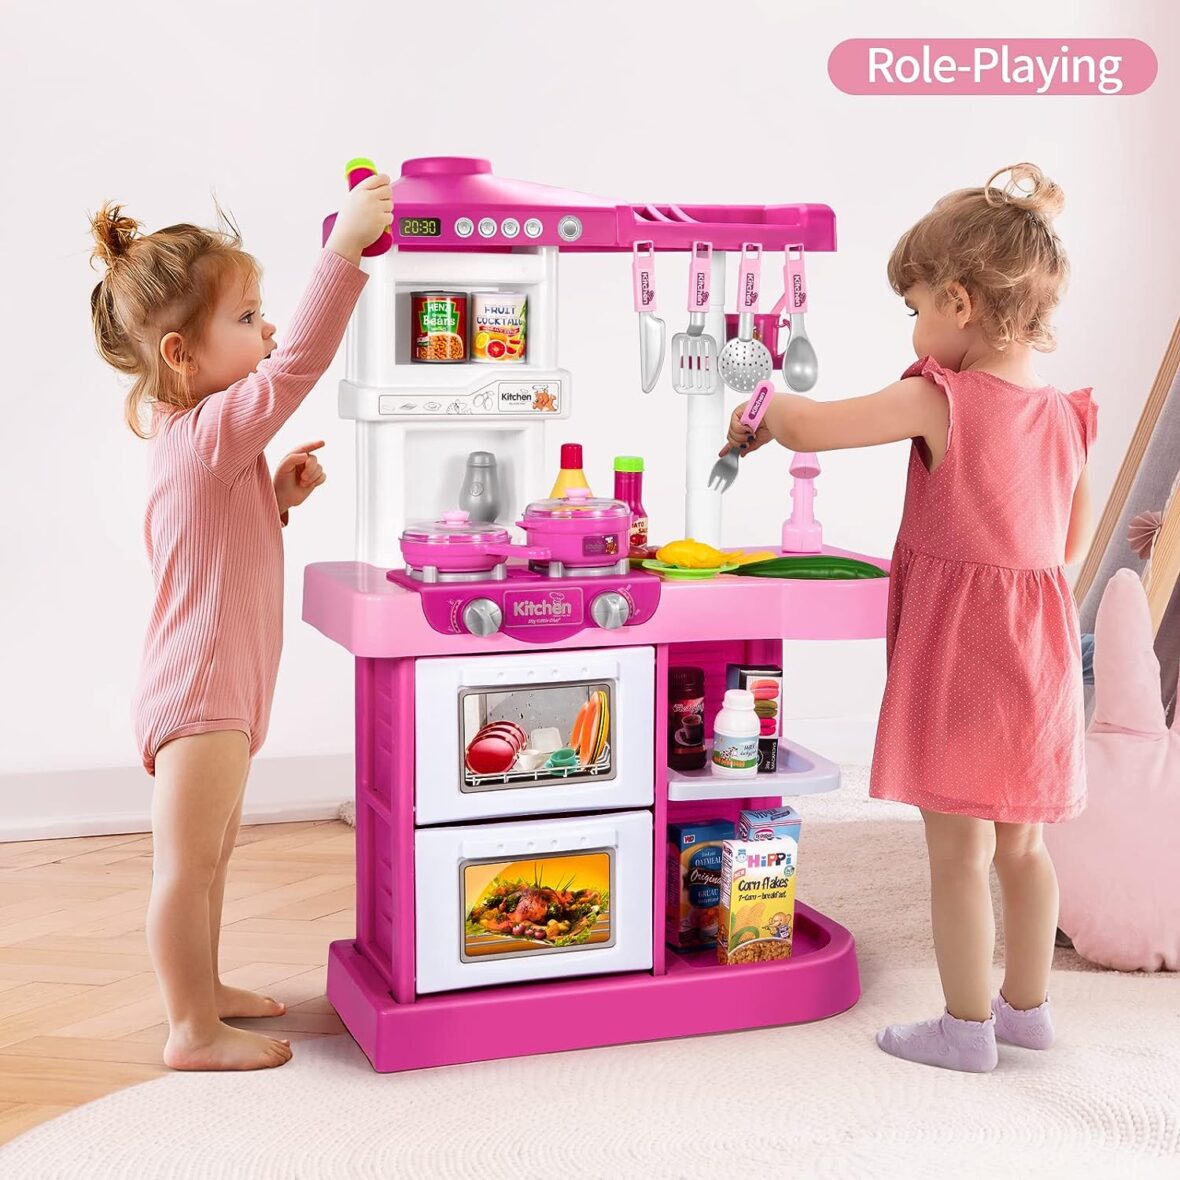 Temi Play Kitchen Pretend Food Playset – 53 PCS Pink Kitchen Toys for Toddlers, Toy Accessories Set w/ Real Sounds and Light